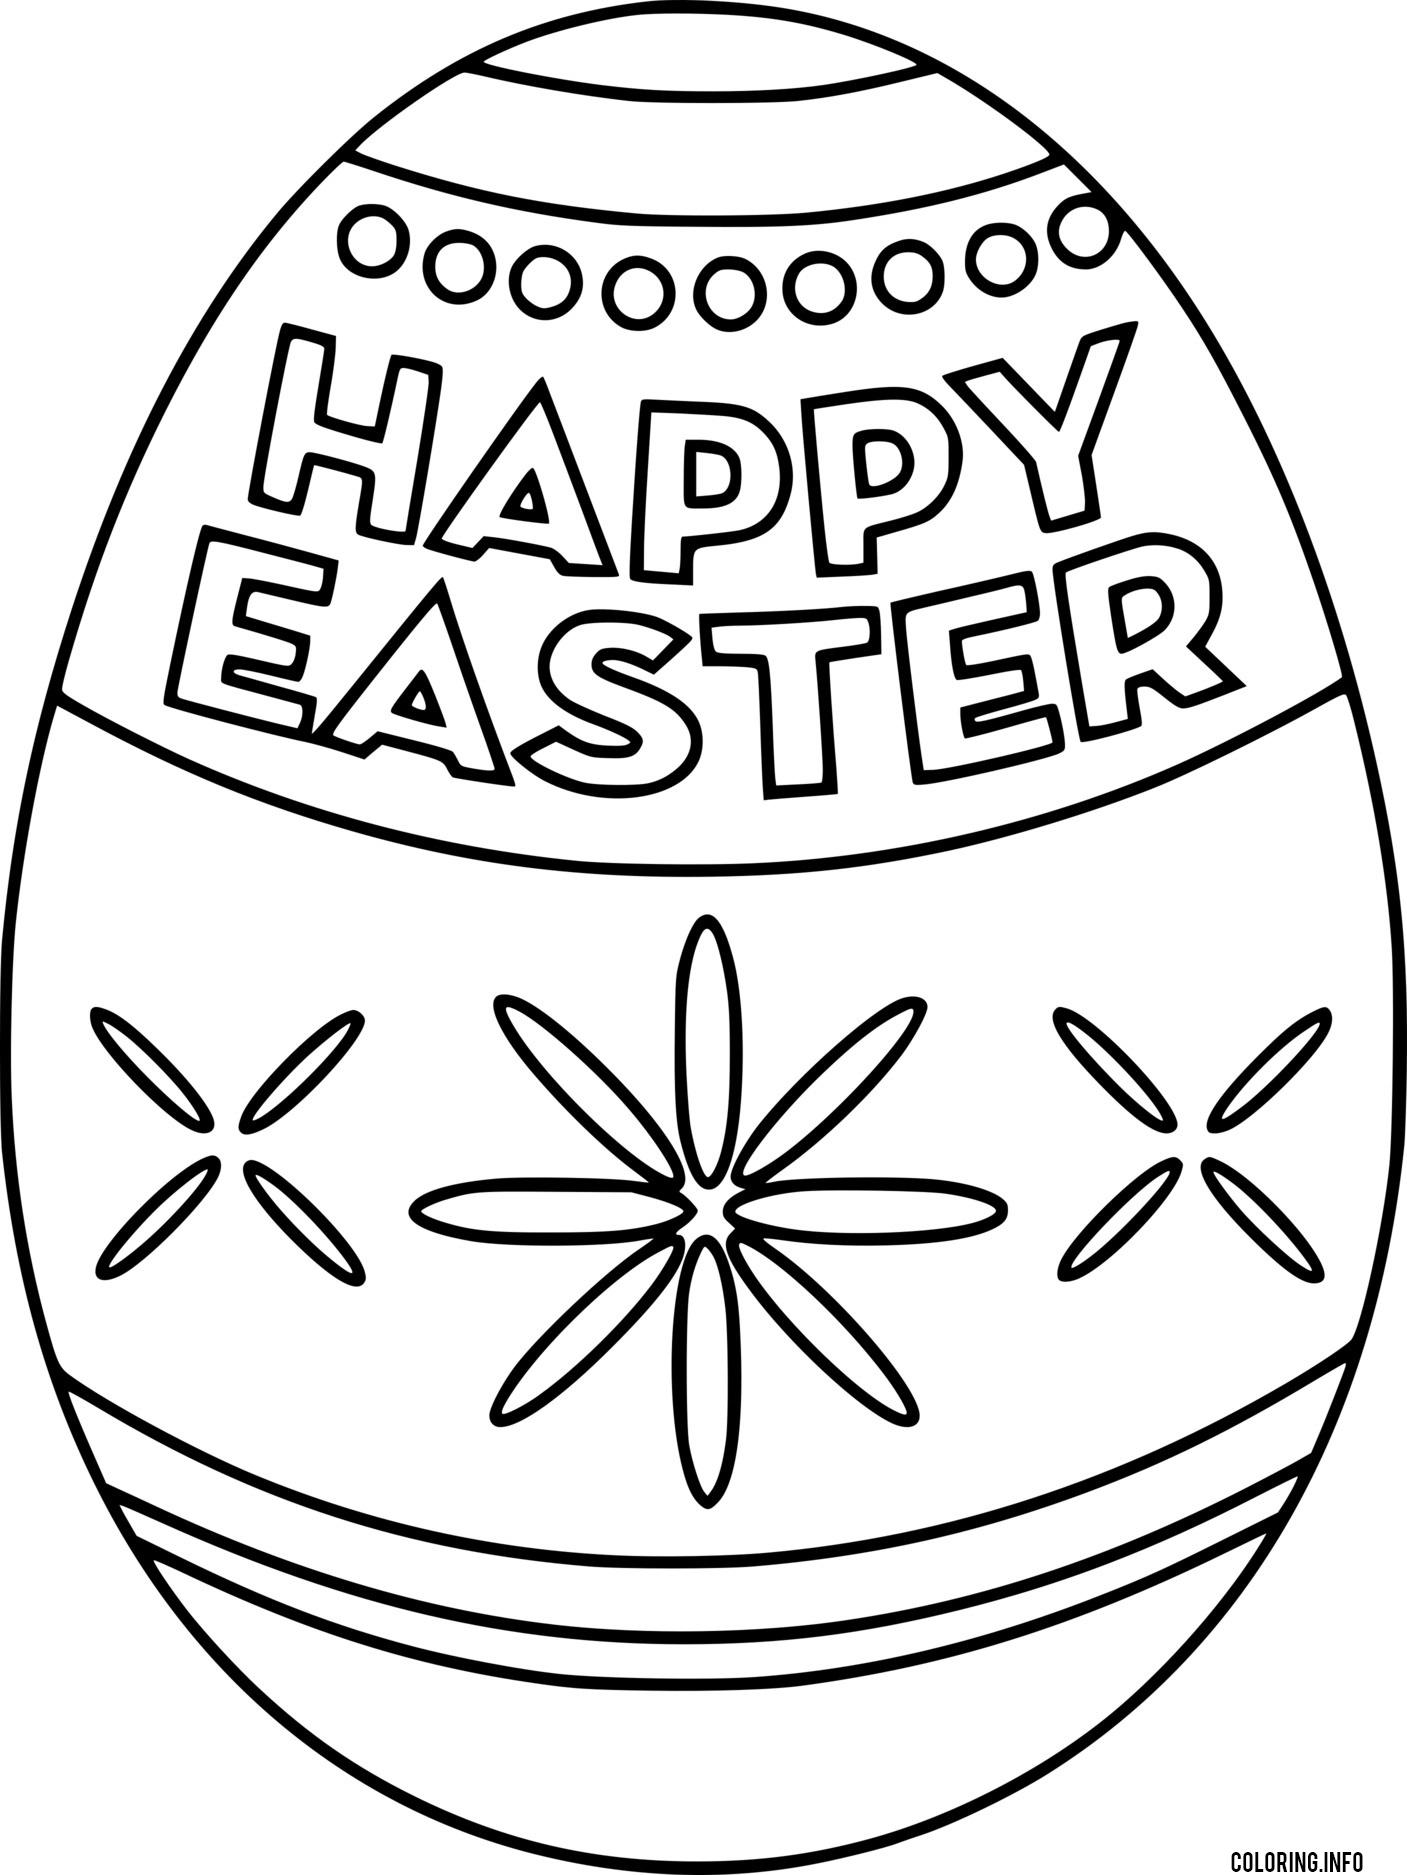 Happy Easter Doodle Egg coloring